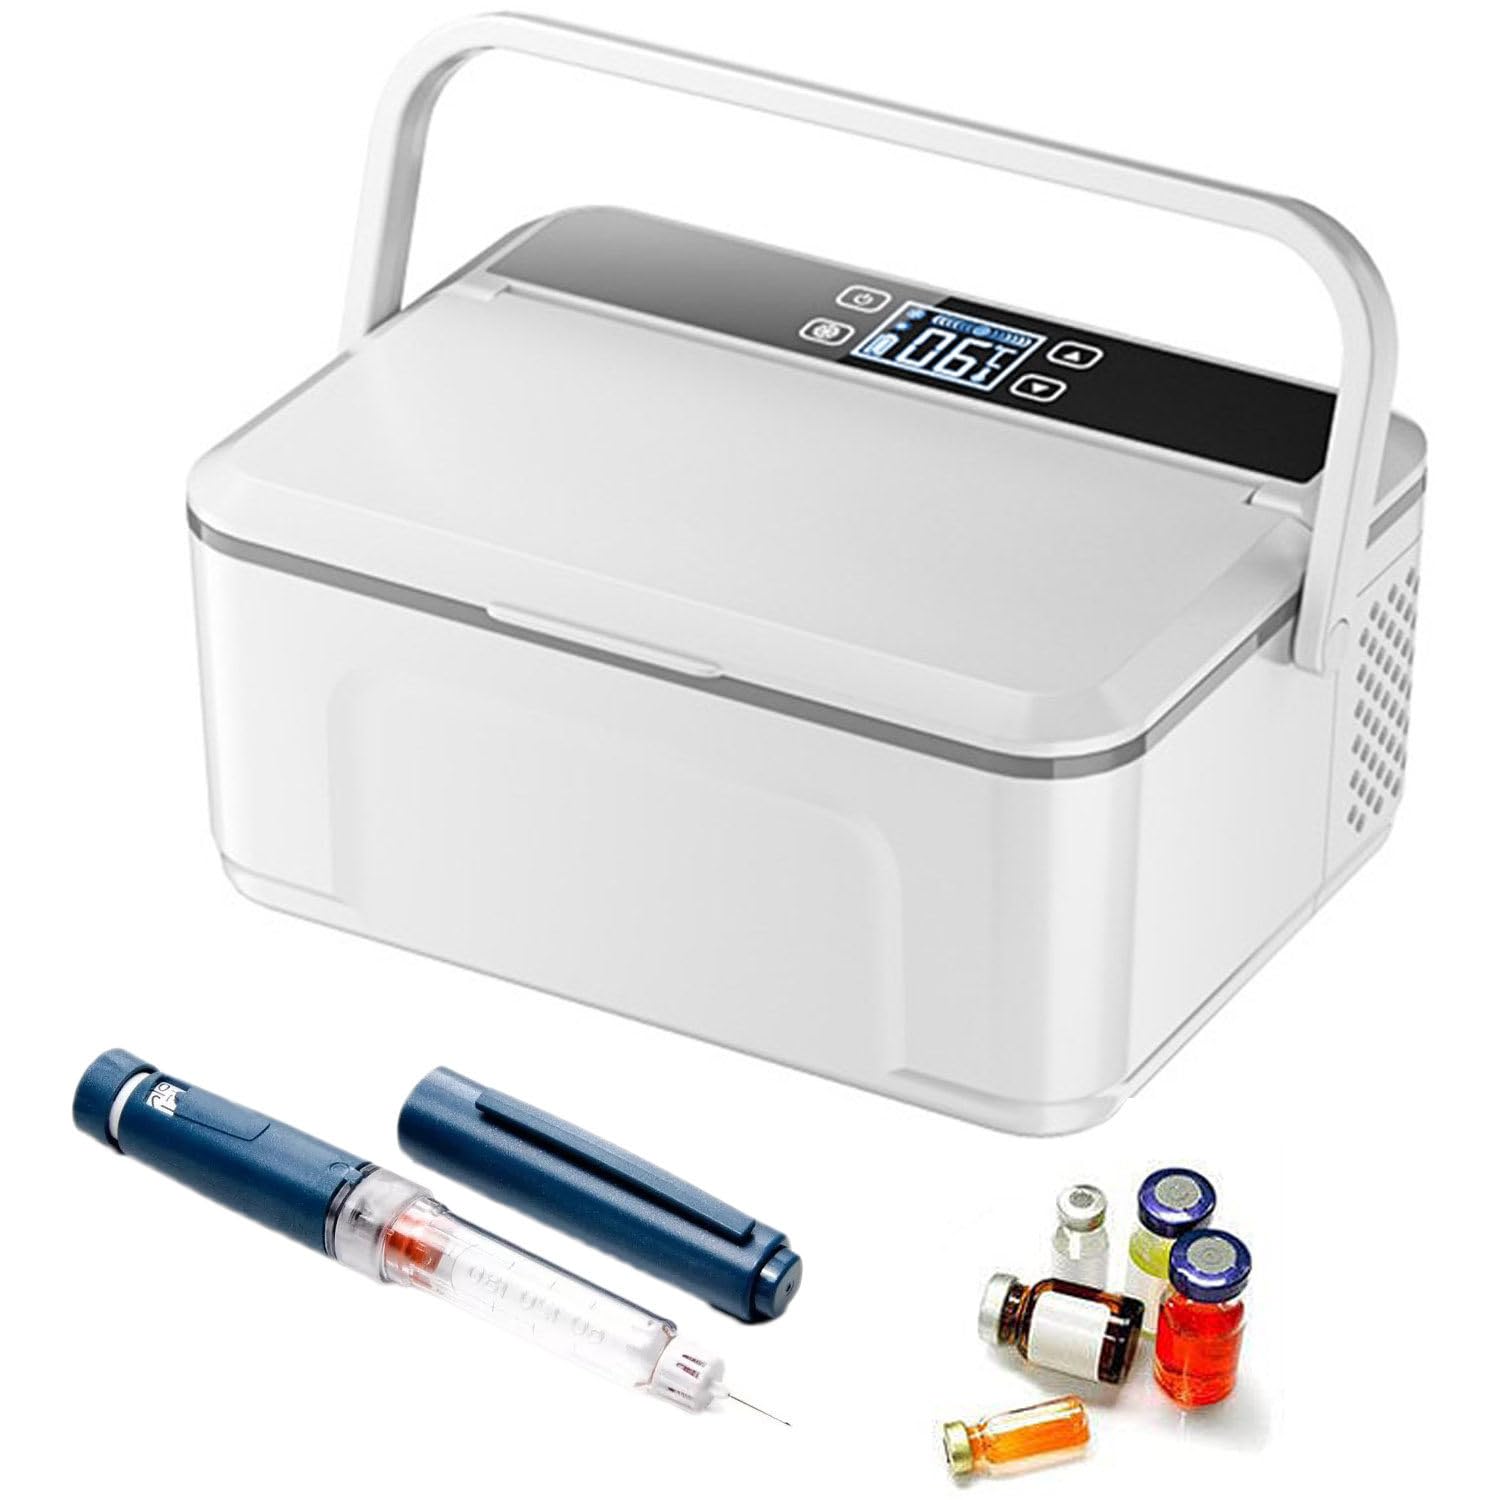  UIBAO 12 L Insulin Cooler Box,Portable Insulin Cooler Cooler Box,Led  Display for Car,Travel,Home Thermostat Drug Cooler,2-8℃ Cooler Bag  Thermostat Medication Cooler Box : Health & Household